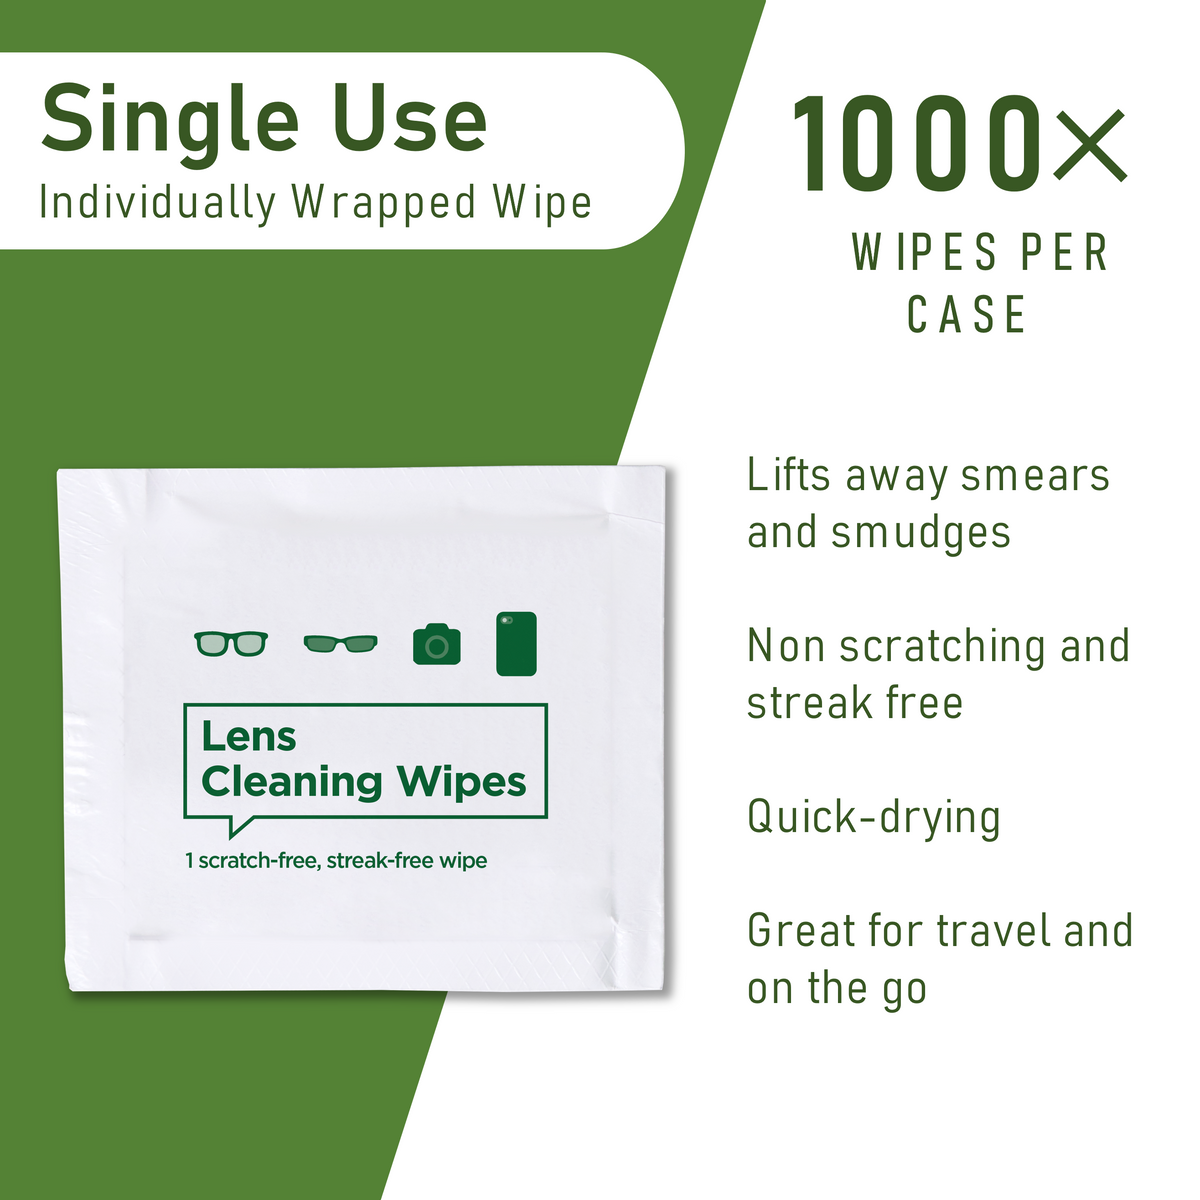 Spotless® Screen and Lens Wipes